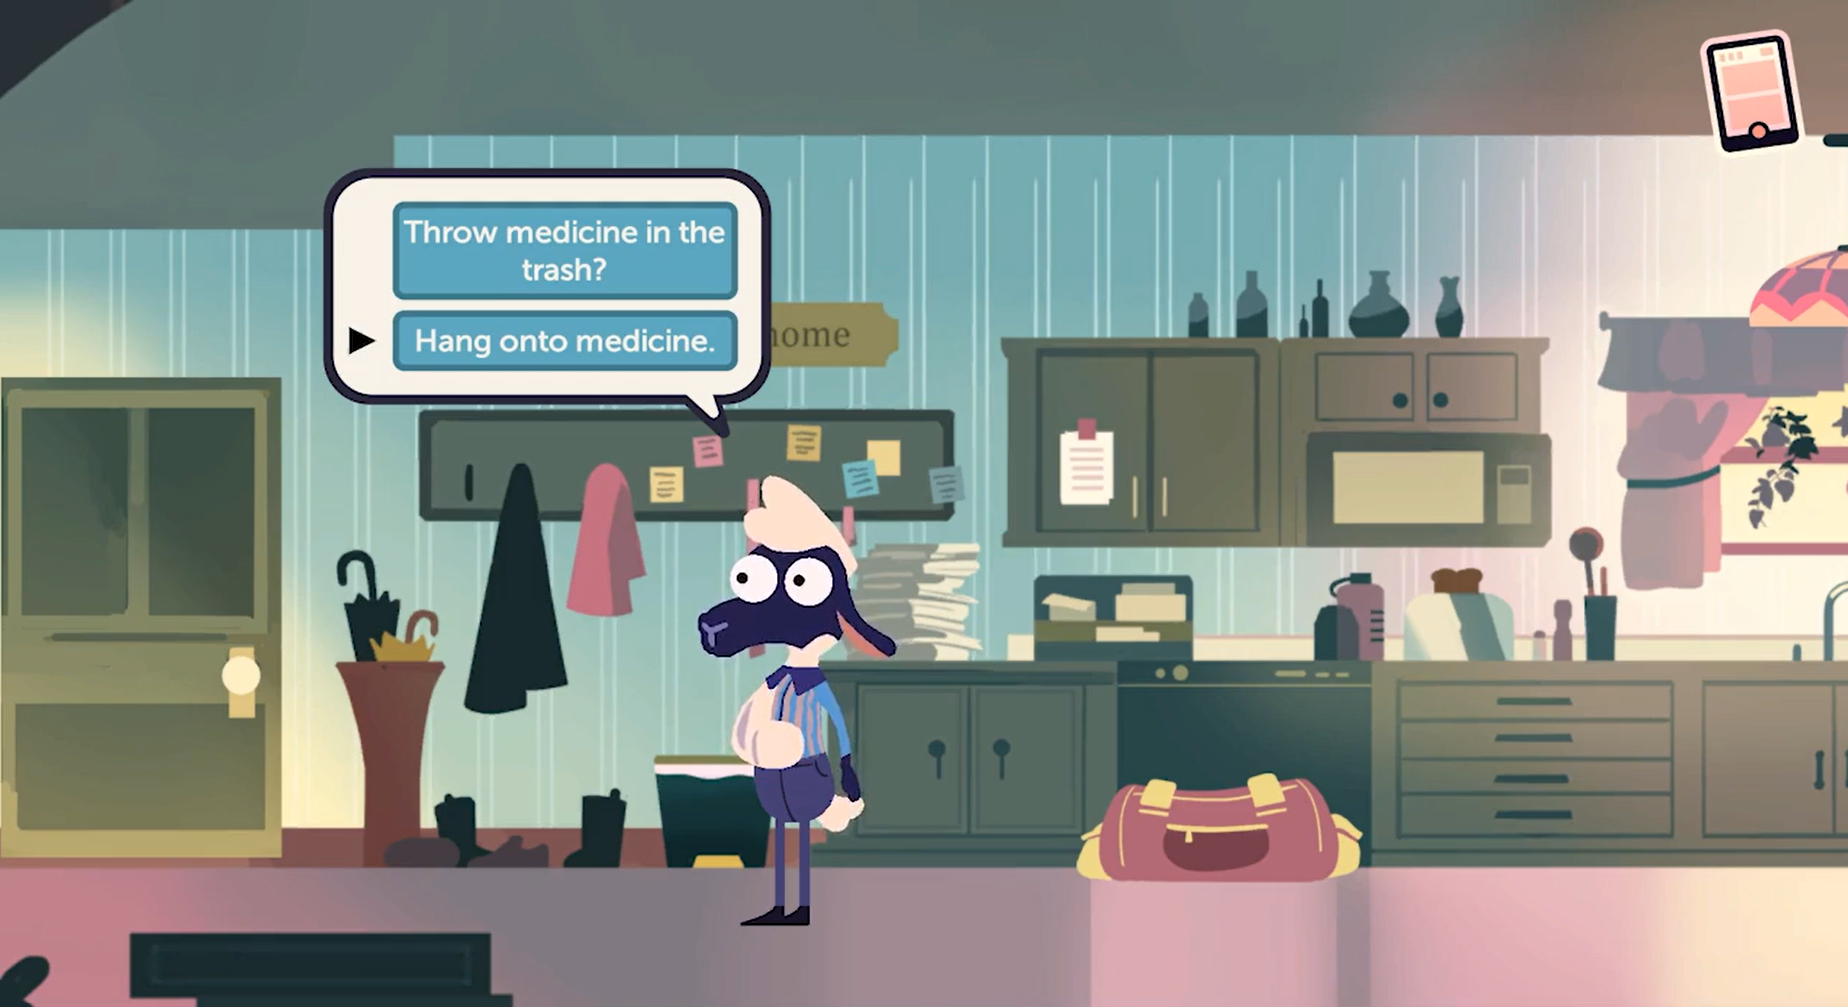 A cartoon sheep in an arm cast stands in a kitchen. A speech bubble has two options listed: keep the medications or throw them in the trash.